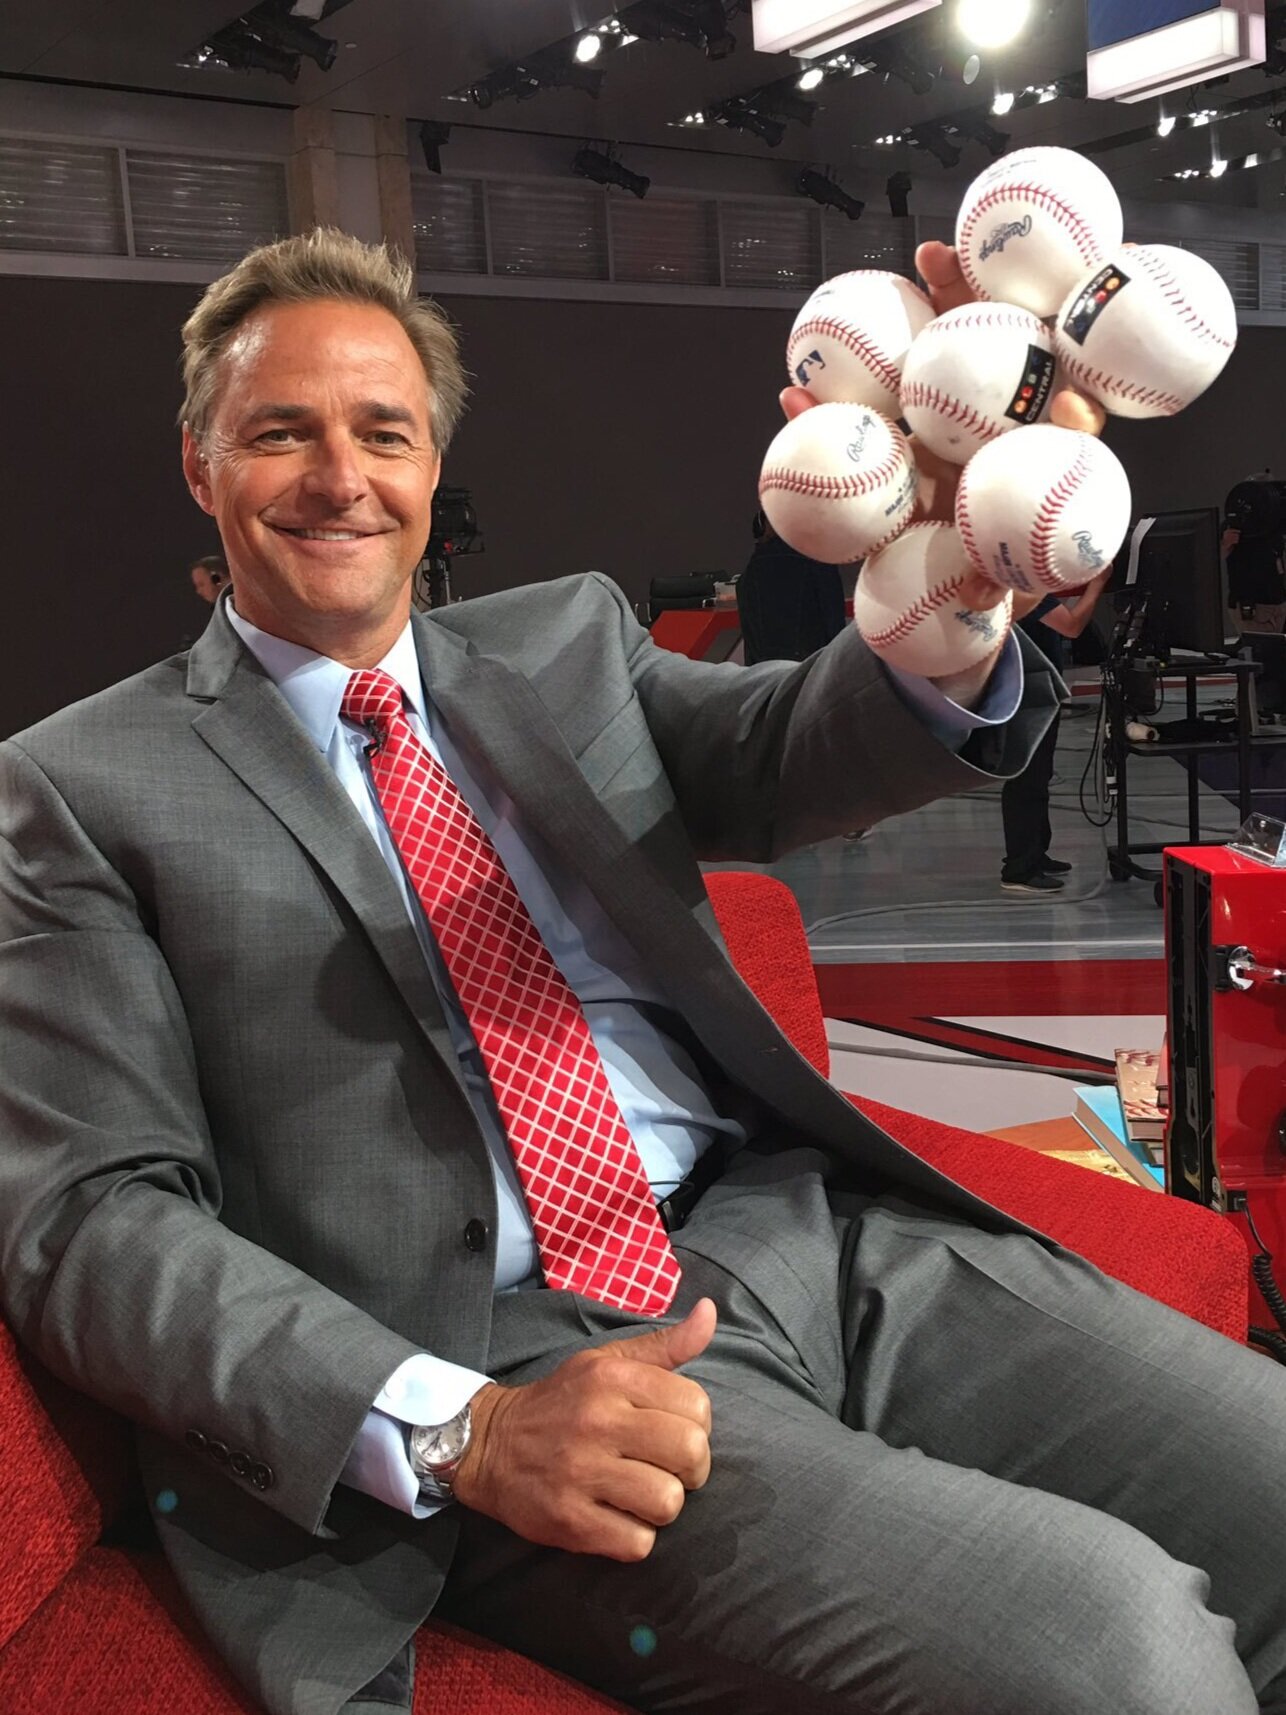 How many baseballs can you hold in one hand? — THE GLORY OF BASEBALL